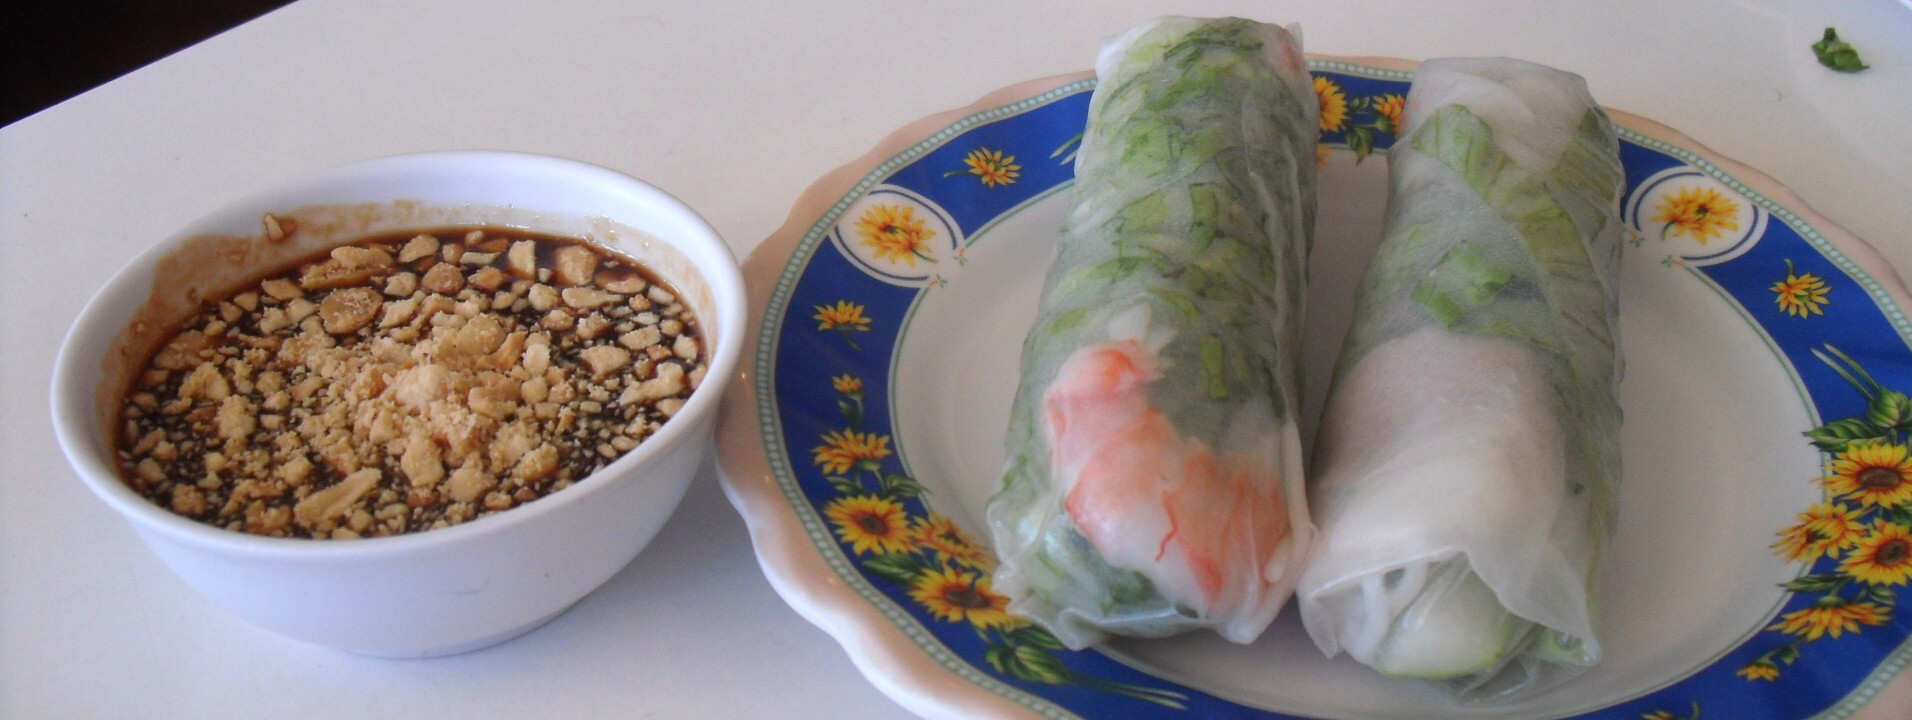 Spring Rolls Fairview Mall Review